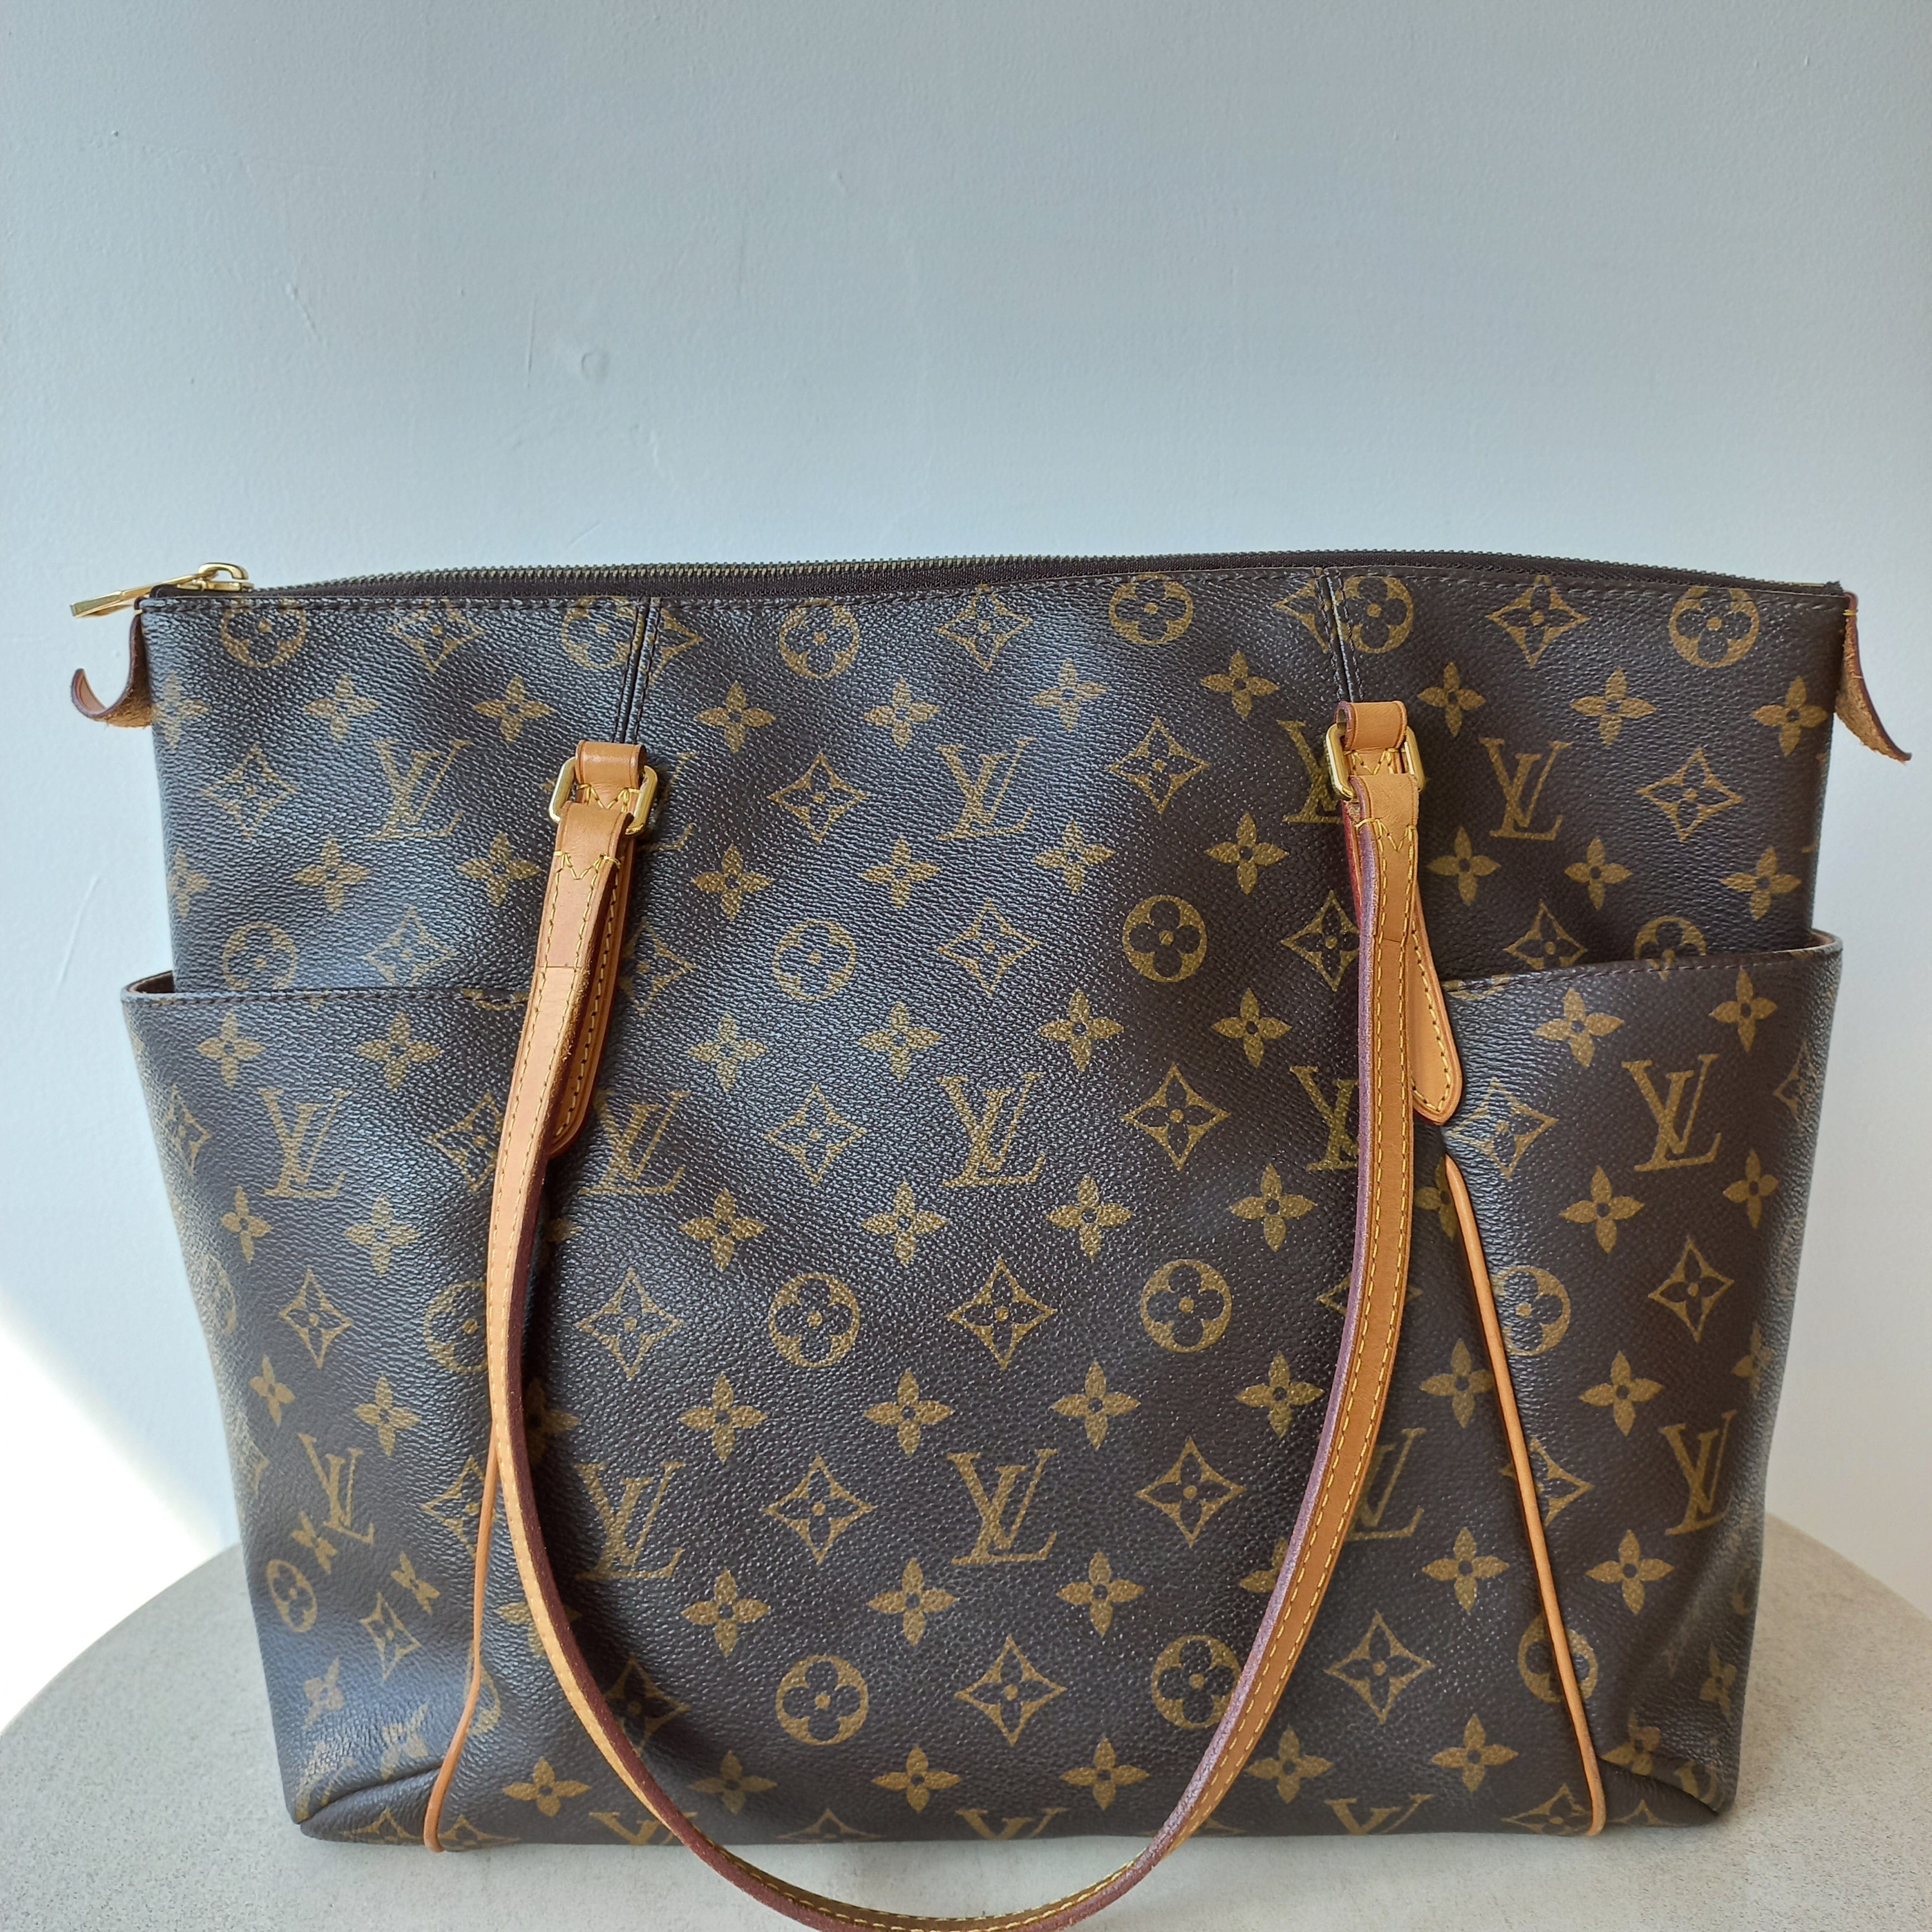 Louis Vuitton Totally Mm Tote Bag